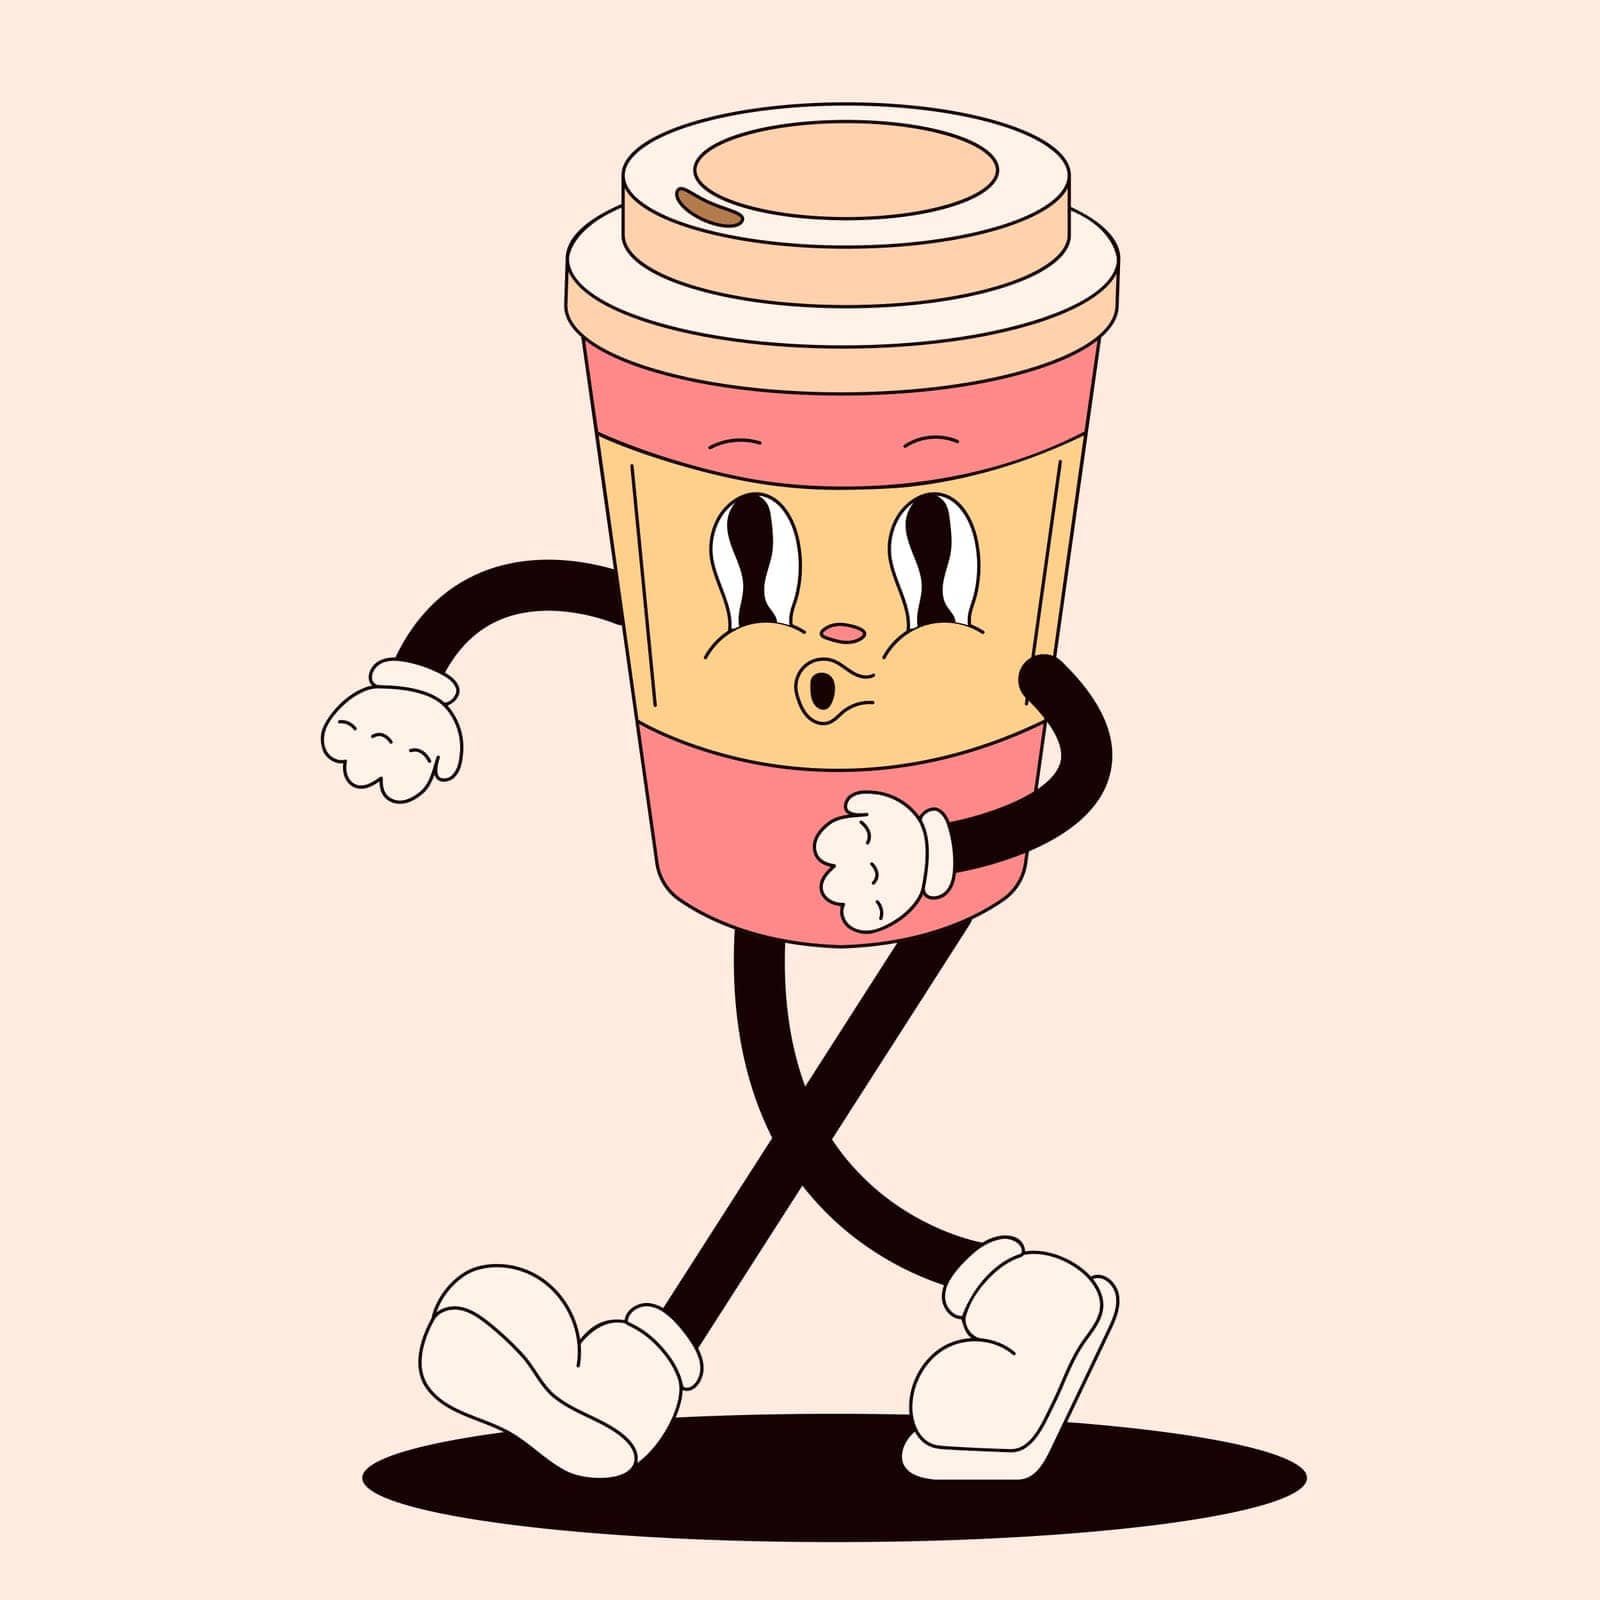 Retro groovy character in the form of a disposable cup. Walking cartoon masco. Hand drawn vector illustration isolated on peach background.